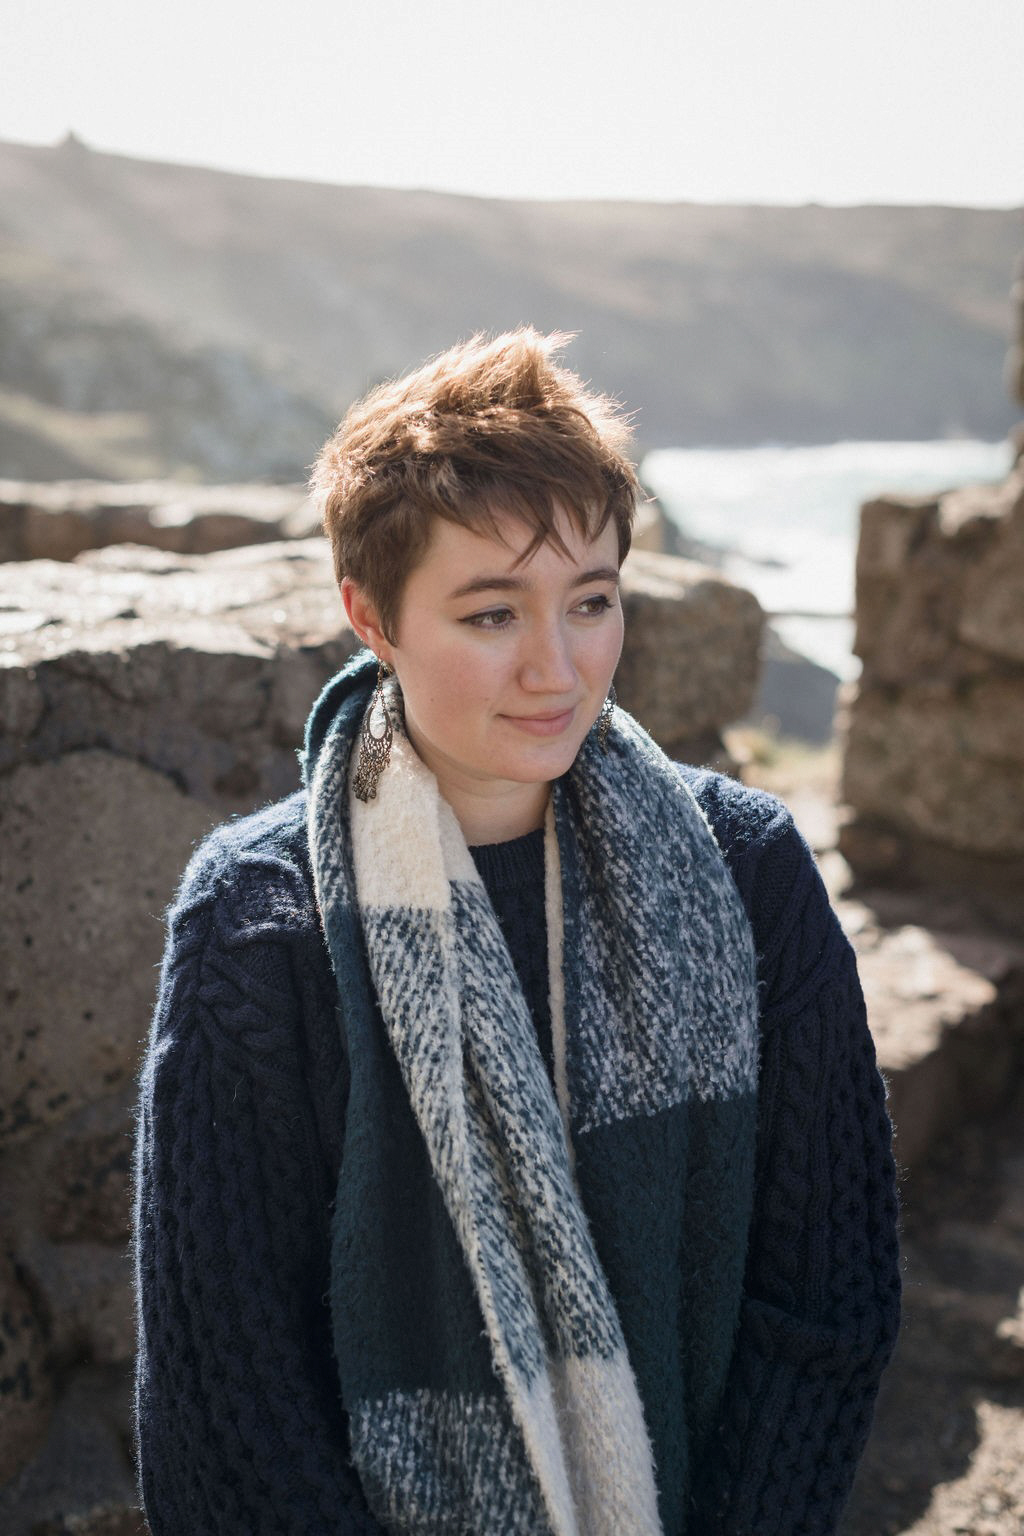 Photograph of Anna Bailey, wearing a dark jumper and blue and white striped scarf, in front of some rocks, looking off to the right.